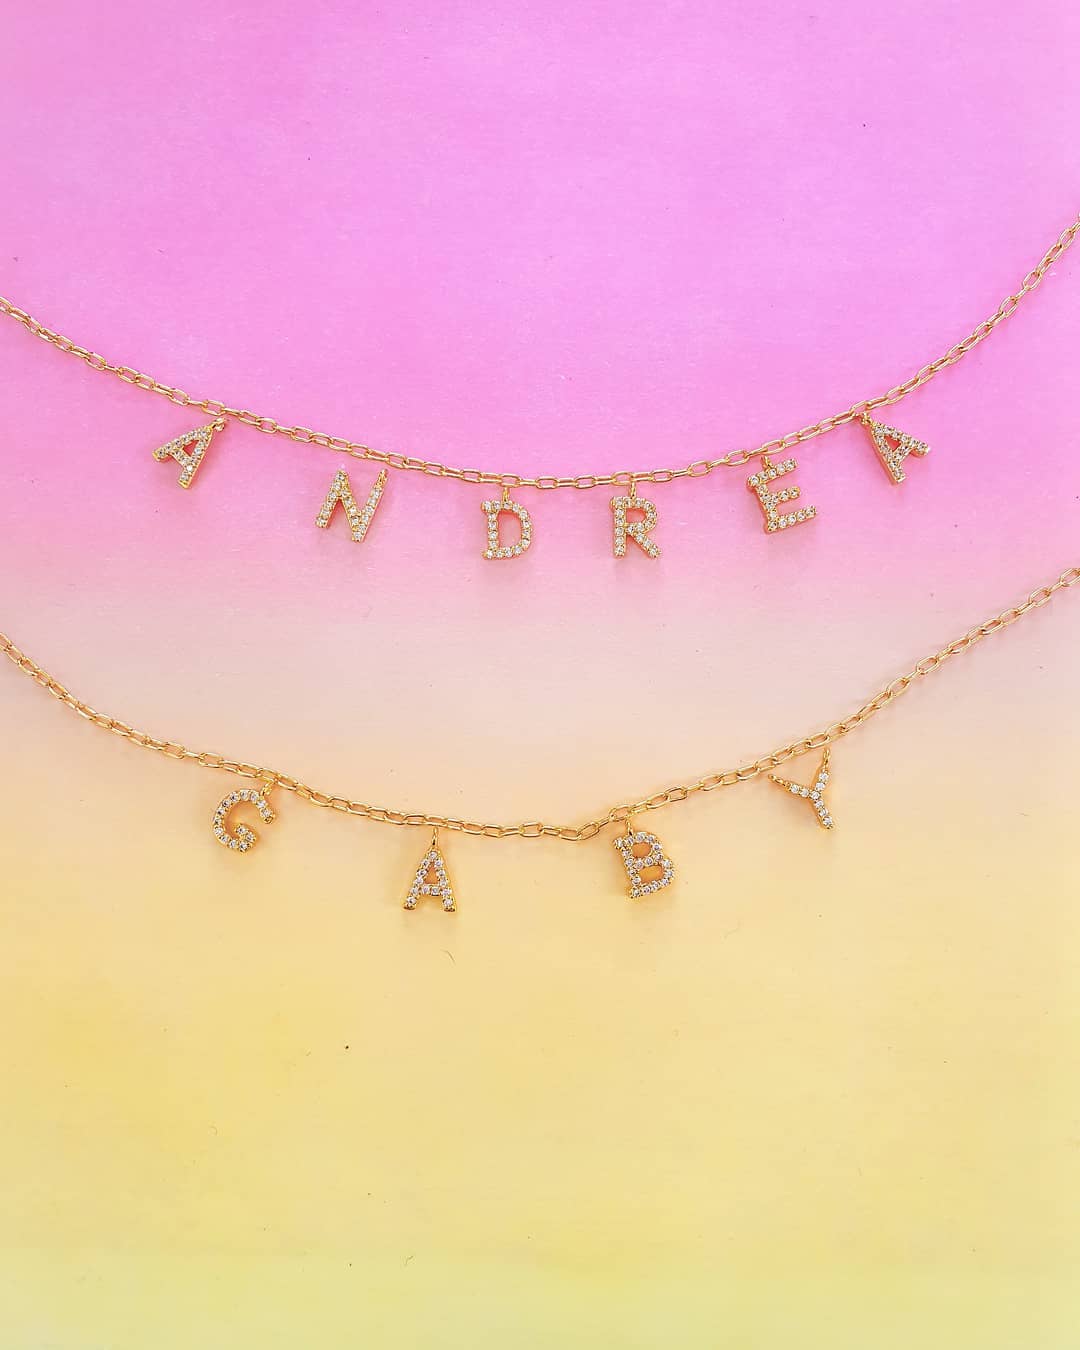 Dainty initials necklace